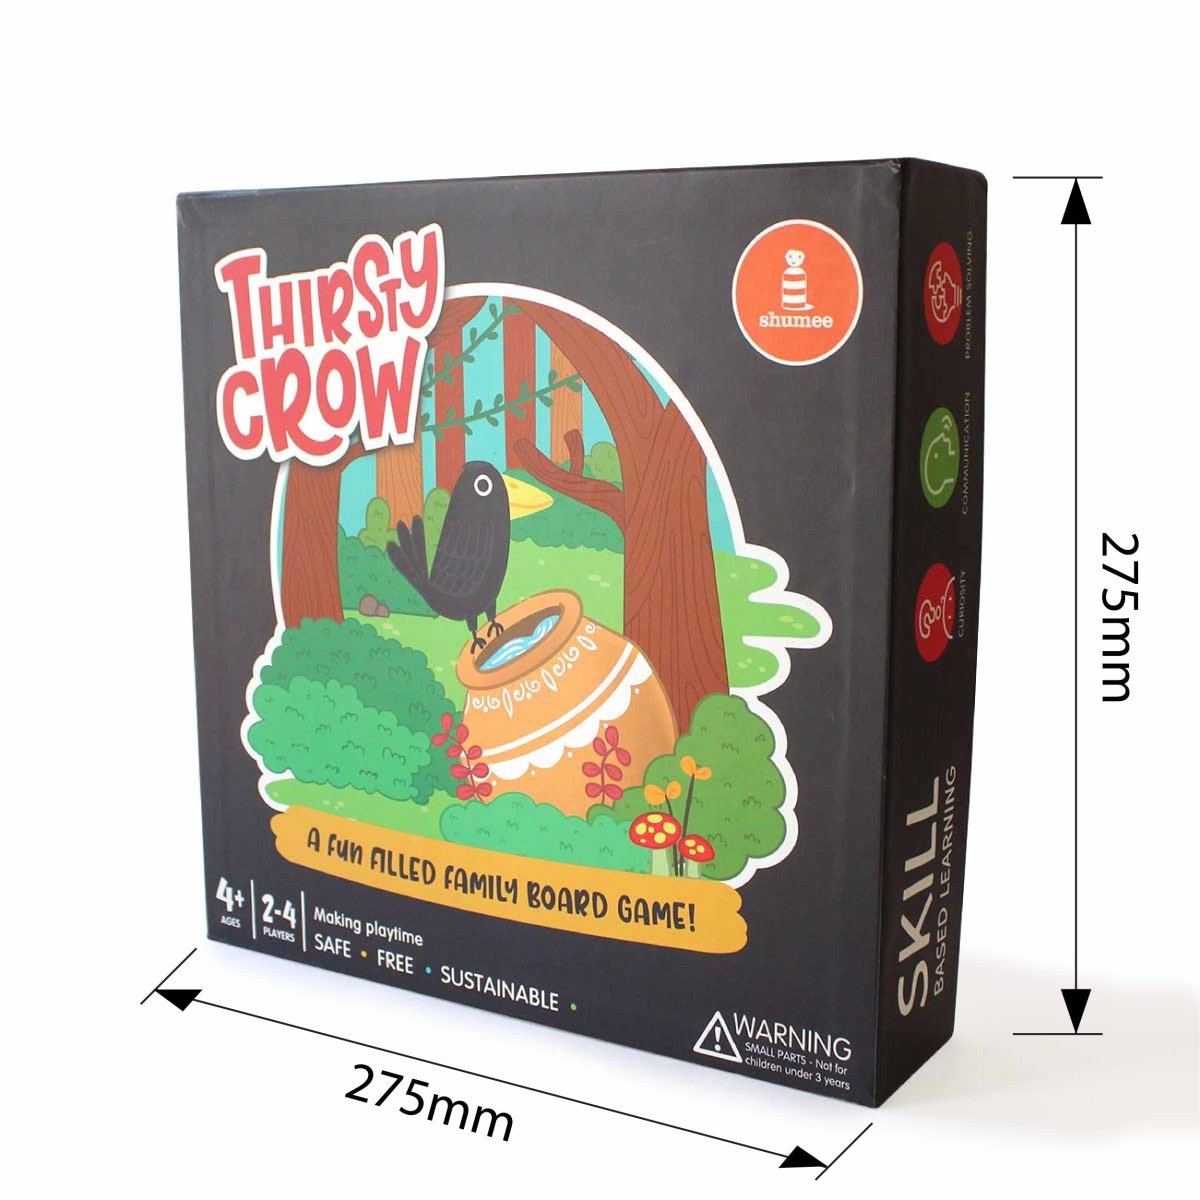 Shumee Thirsty Crow- Board Game - EXP-IN-TTC-W-4yrs-0097